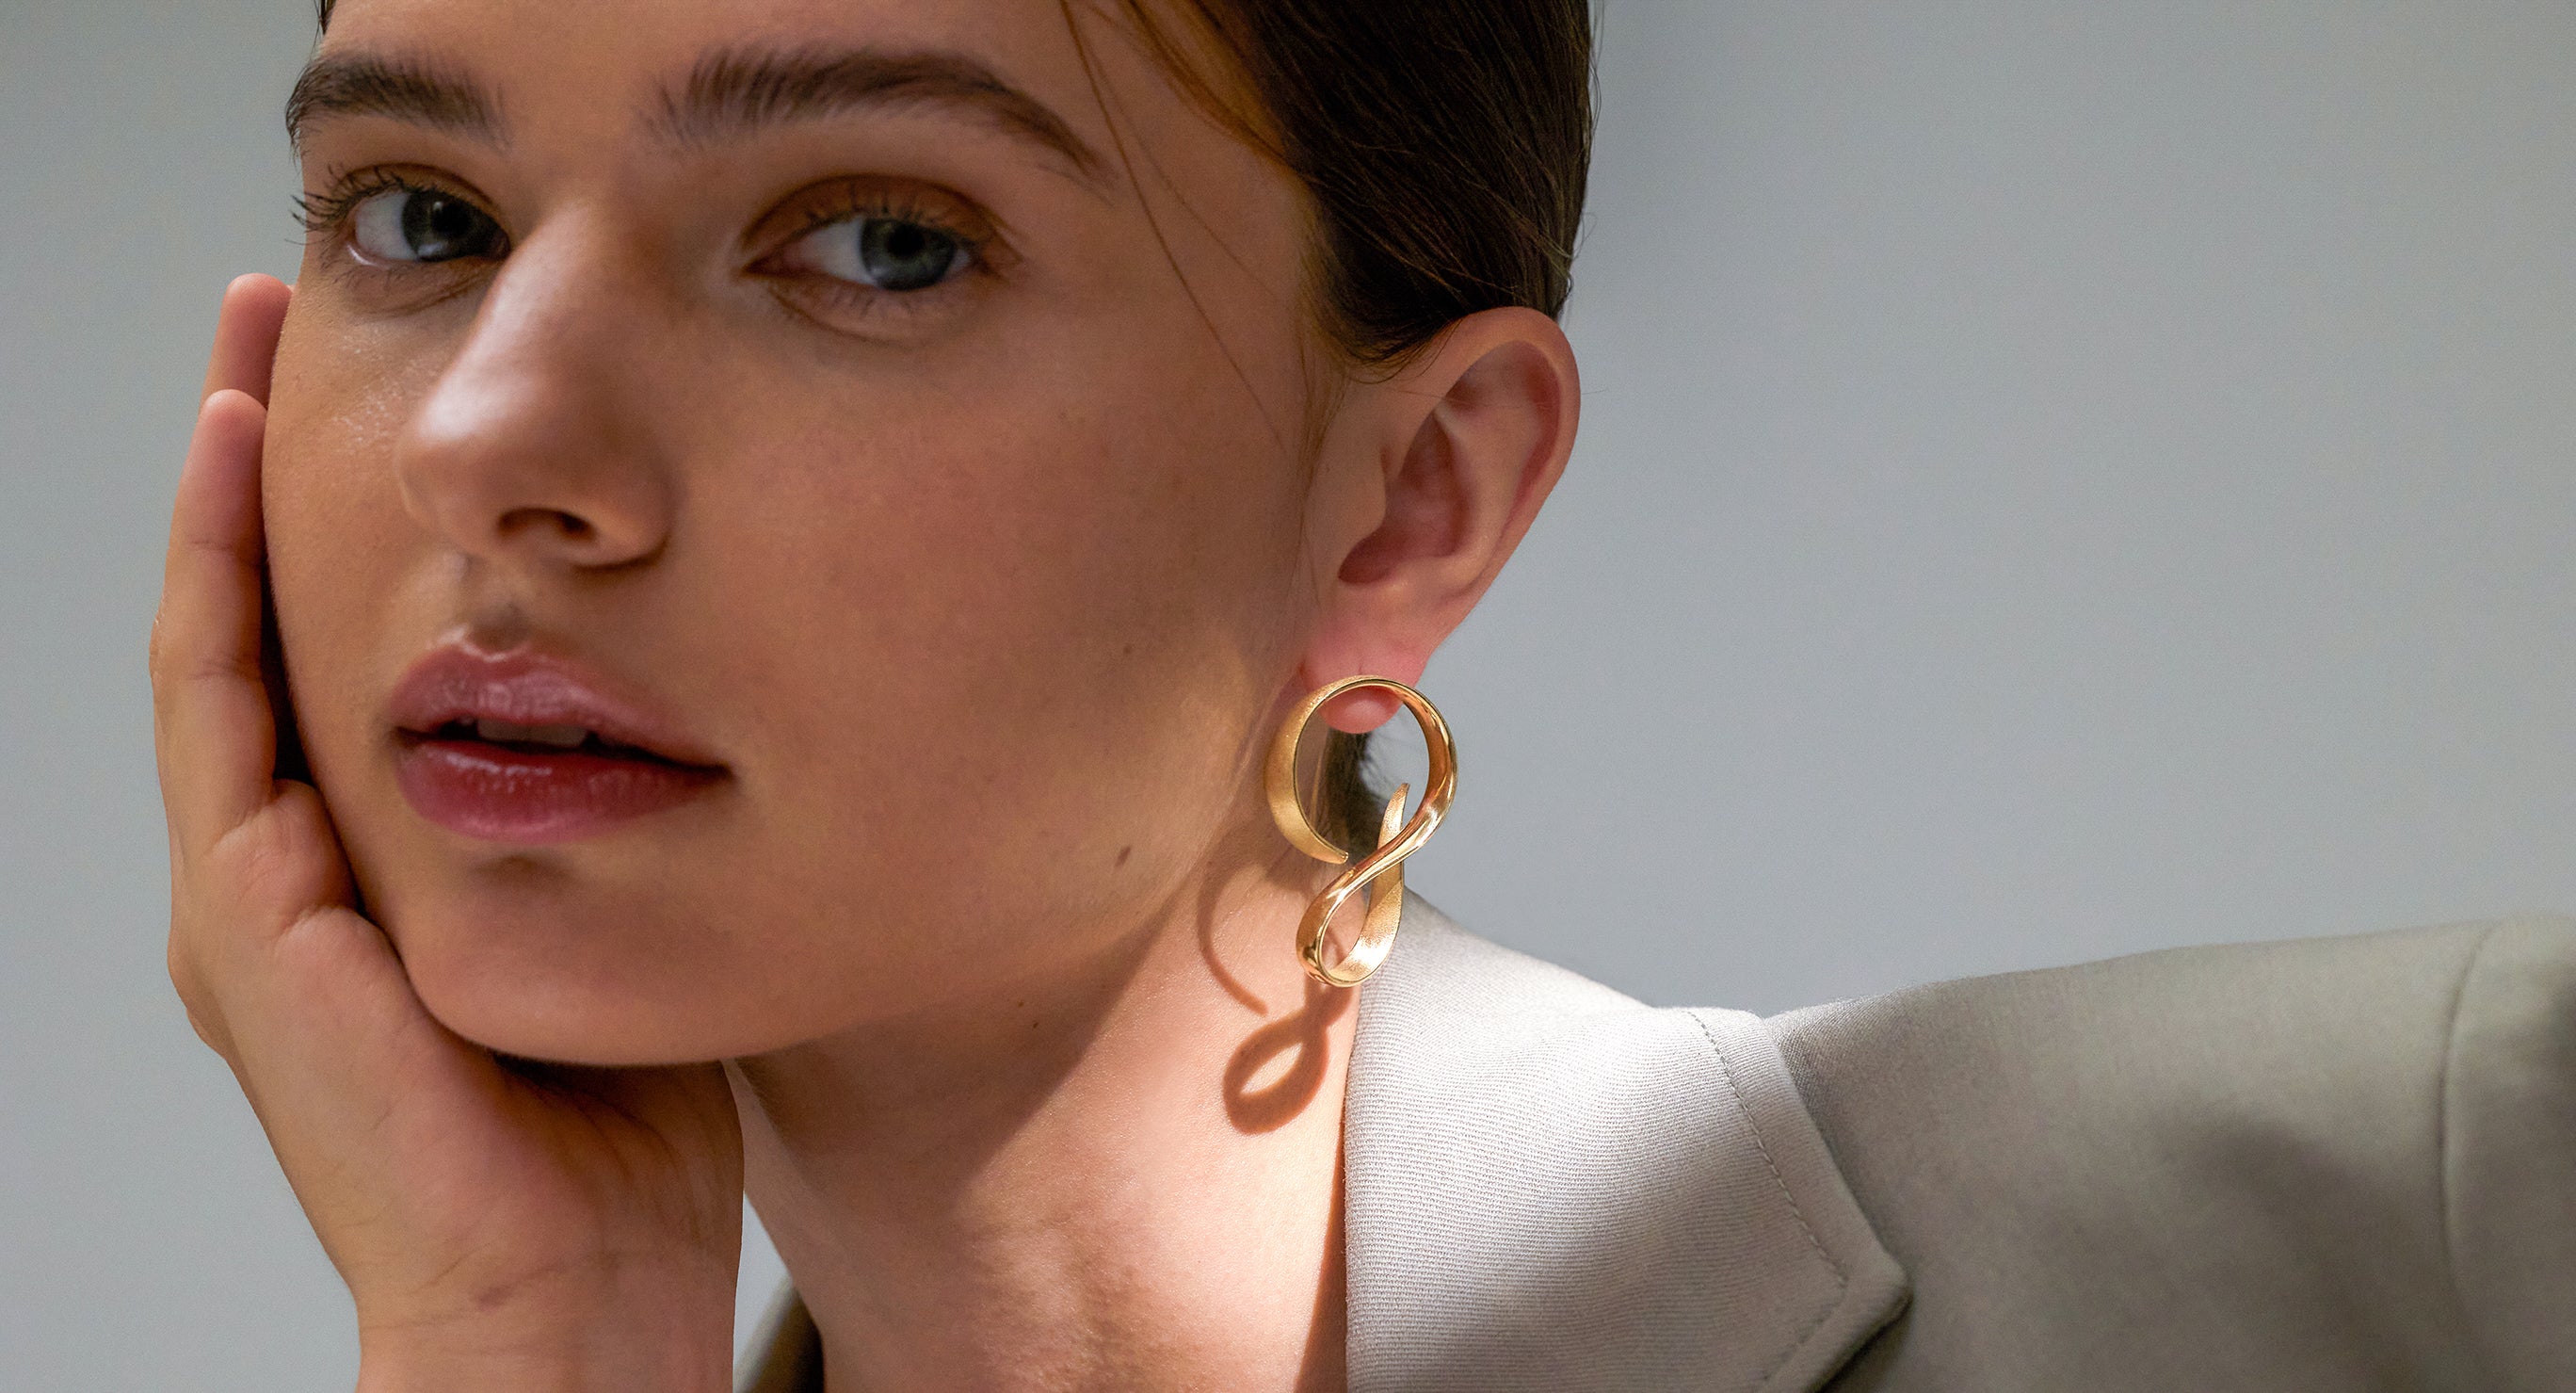 Model wears Yellow Gold Earrings while looking at camera and resting her face in her hand